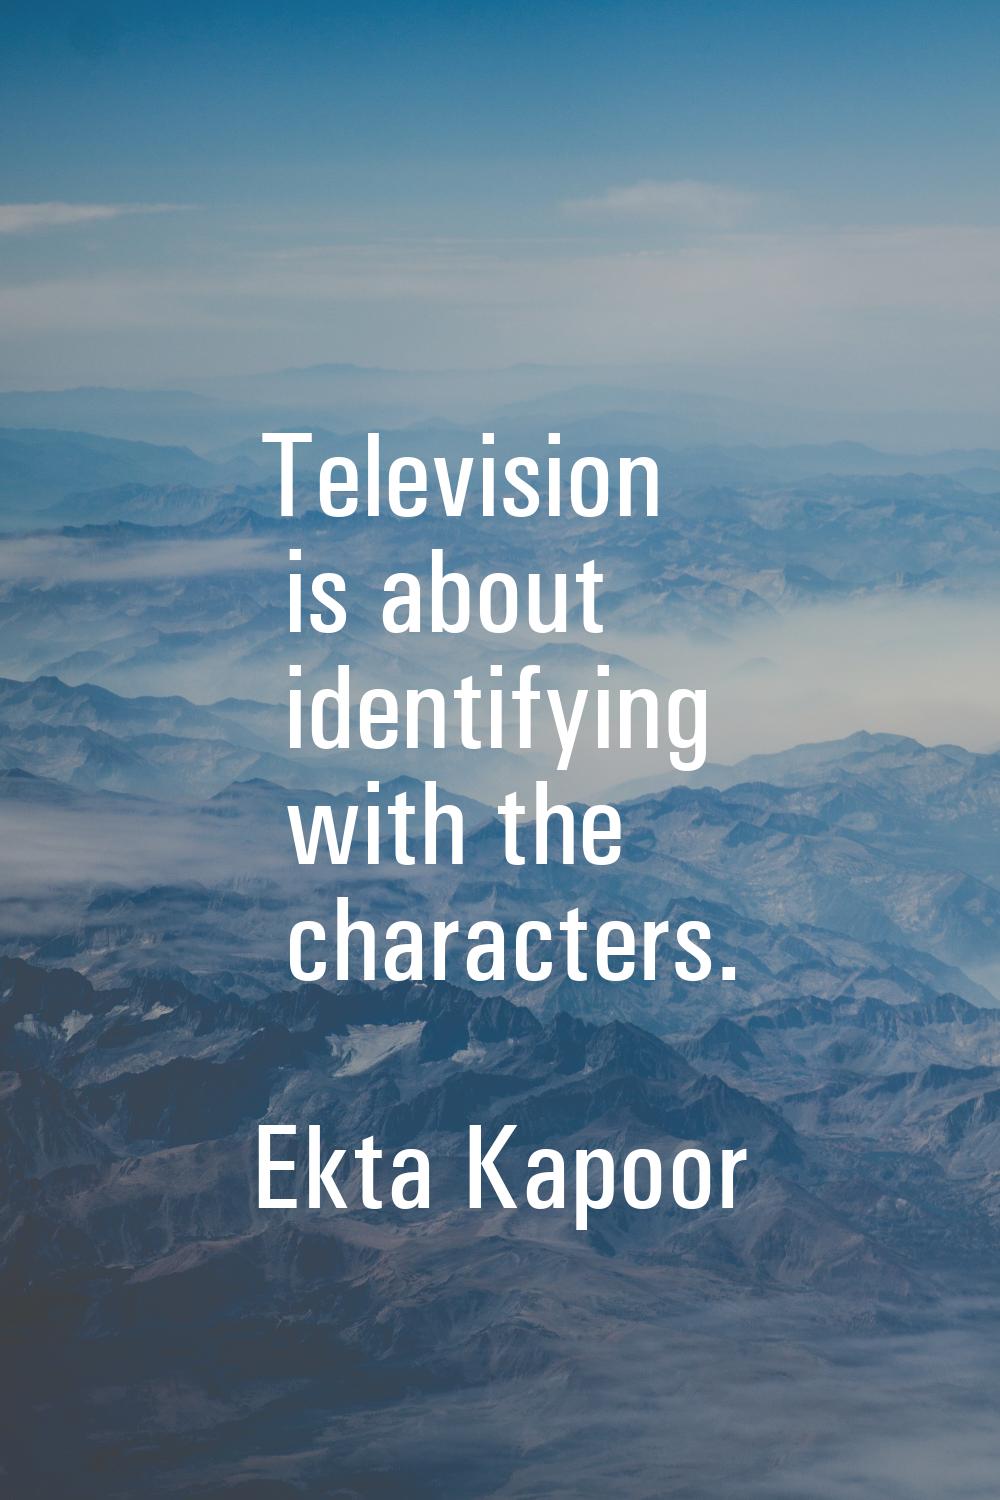 Television is about identifying with the characters.